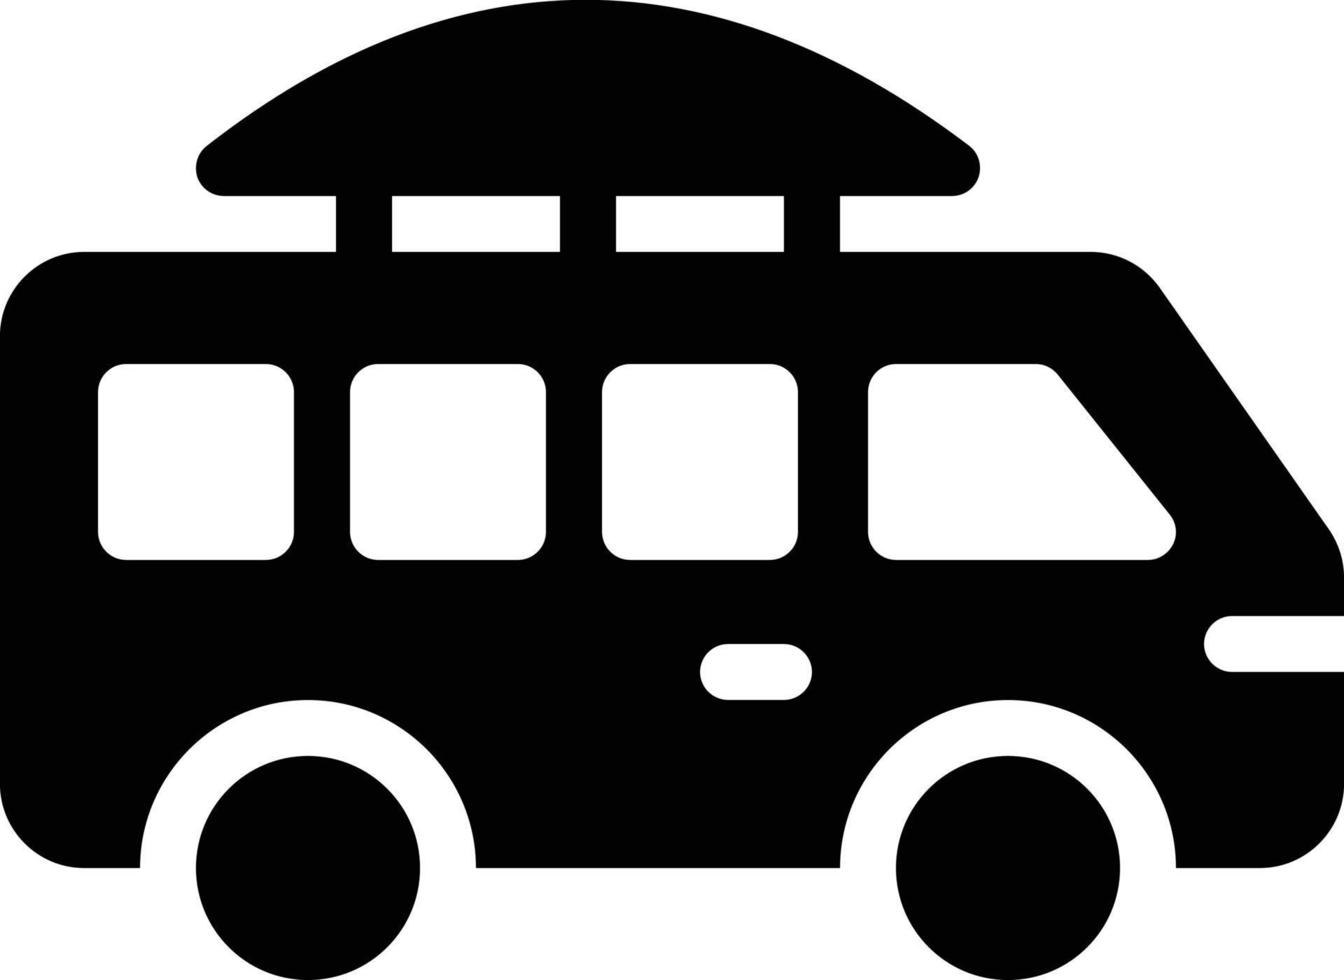 travel bus vector illustration on a background.Premium quality symbols.vector icons for concept and graphic design.